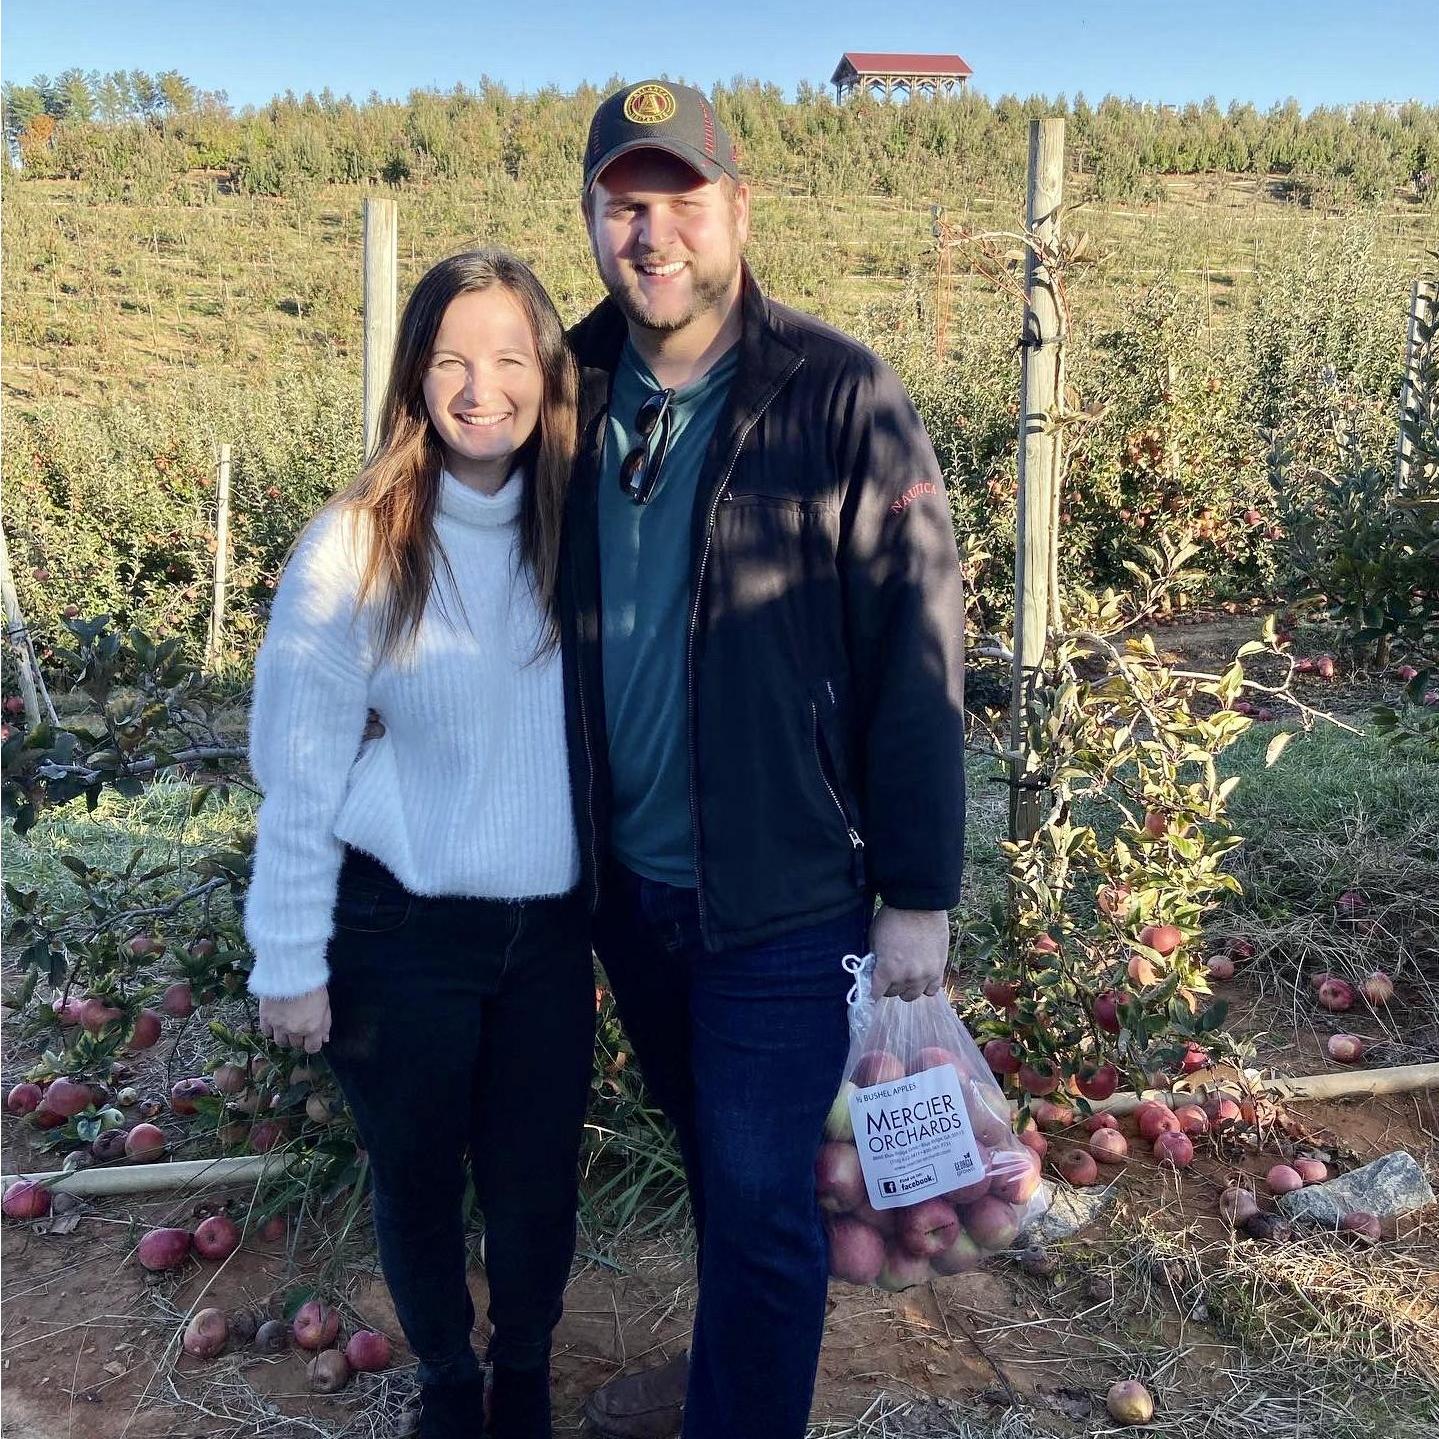 For Beth's birthday in November 2019, we spent the weekend taking a train ride through Blue Ridge, GA & going apple picking.